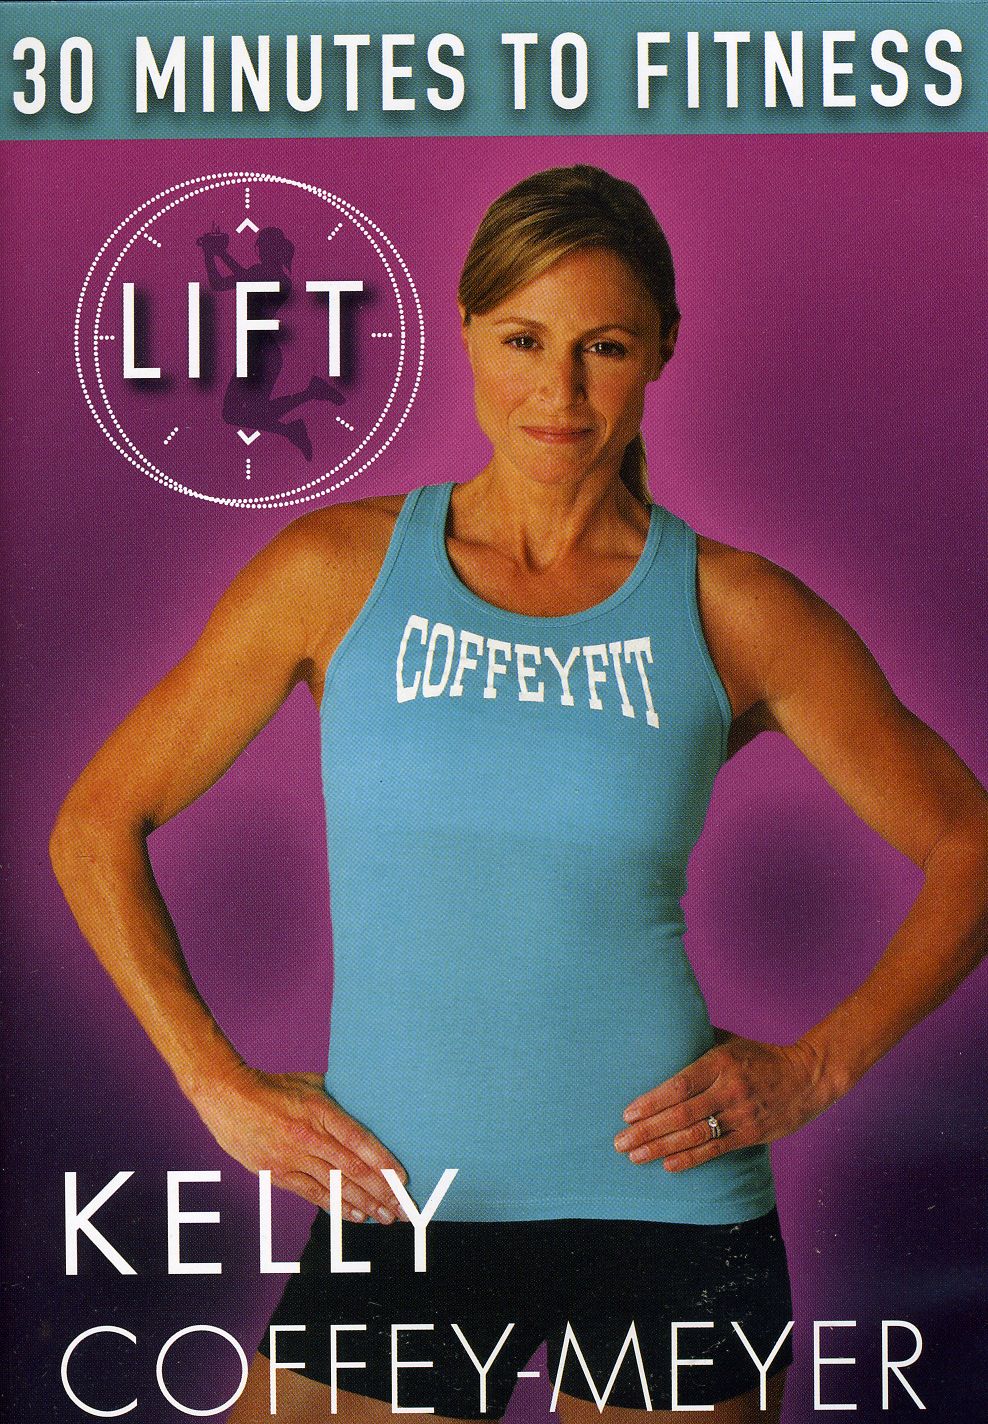 30 MINUTES TO FITNESS: LIFT WITH KELLY WORKOUT